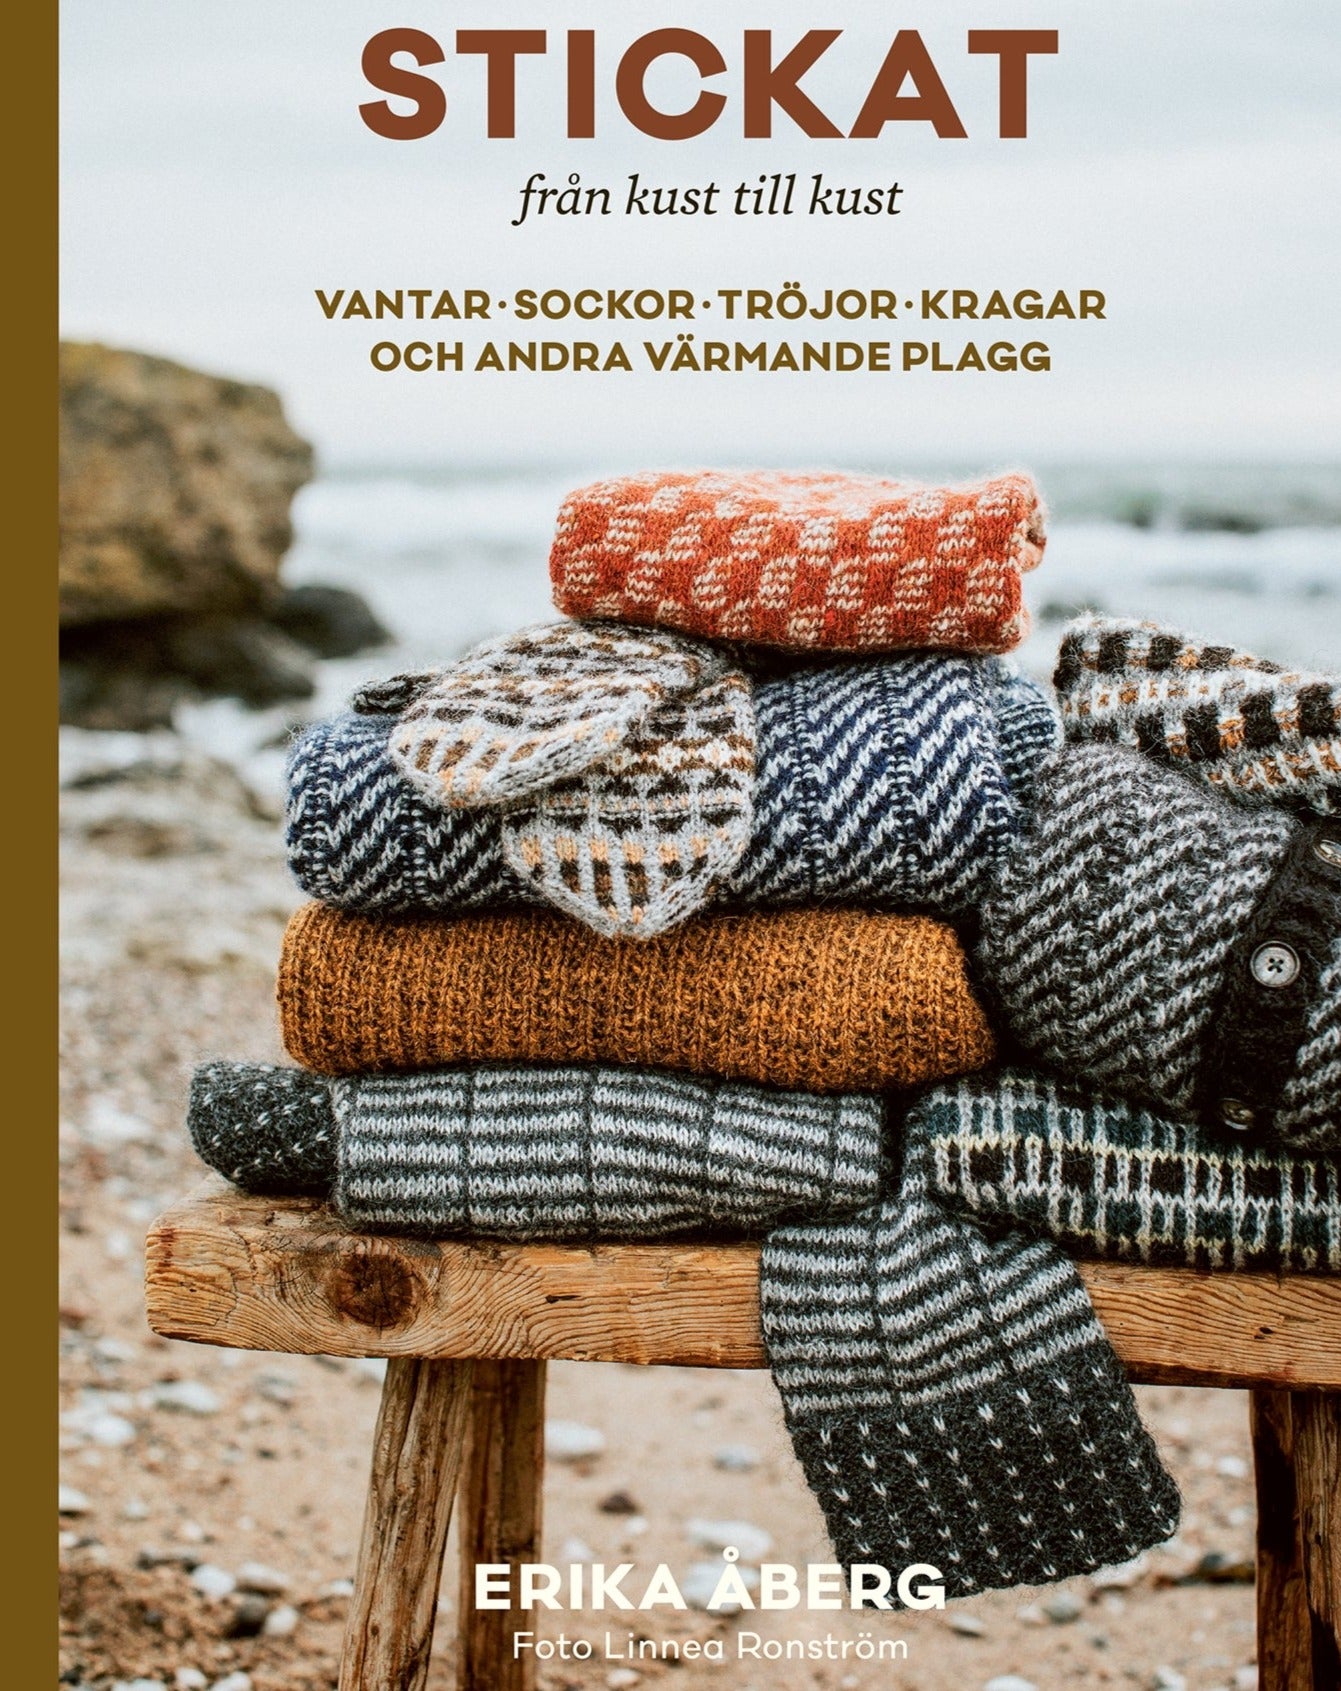 Knitted from coast to coast - Erika Åberg